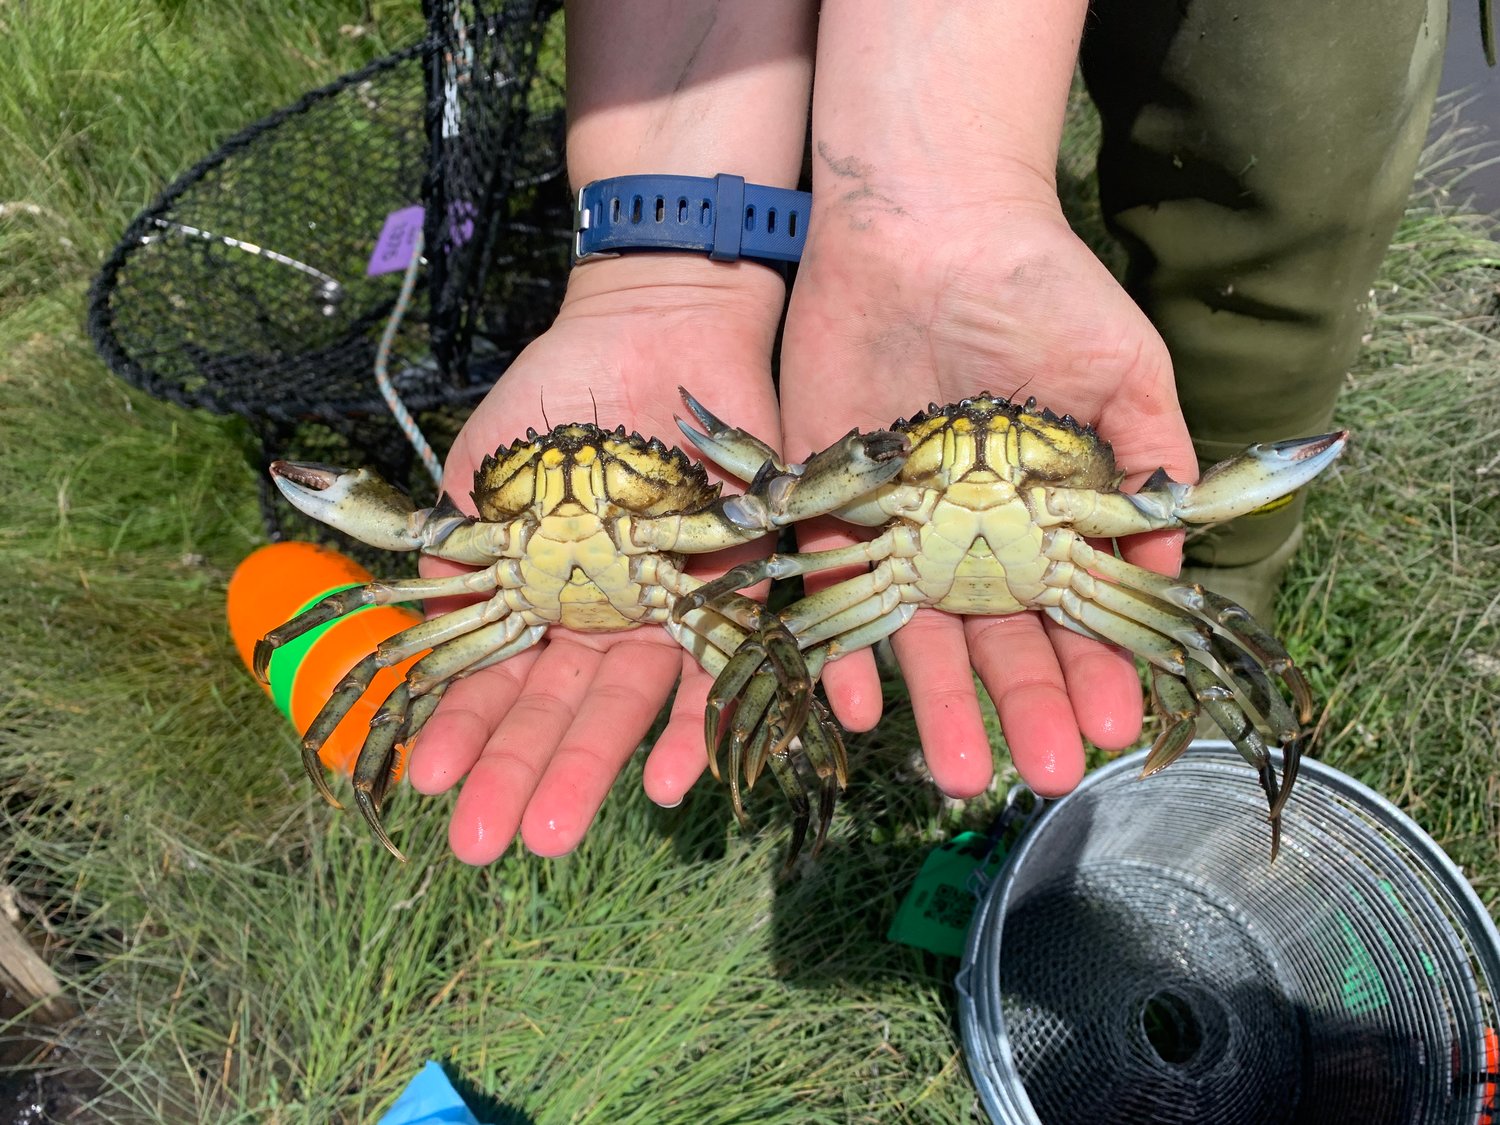 Two European green crabs removed by WDFW from Hood Canal near Seabeck in Kitsap County on June 2, 2022. Photo by WDFW.